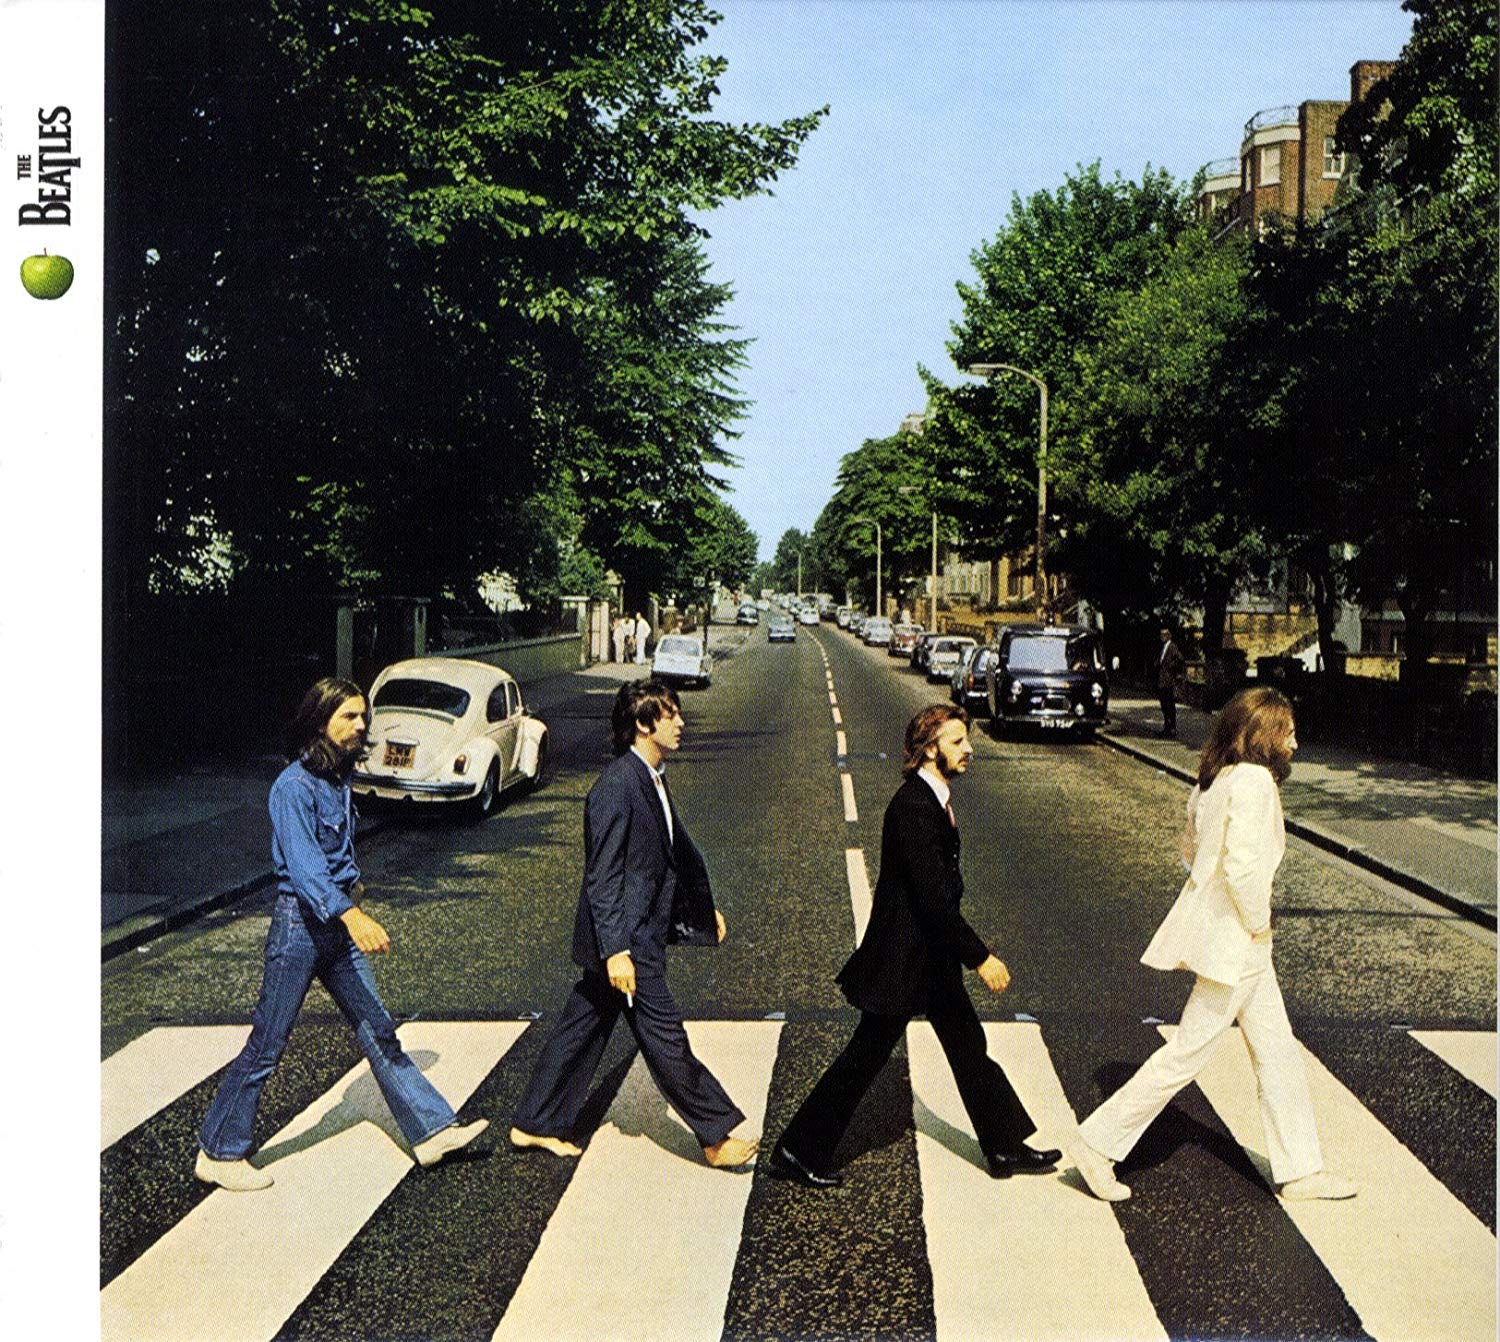 The Top 20 Beatles Songs, #7: “Here Comes The Sun”